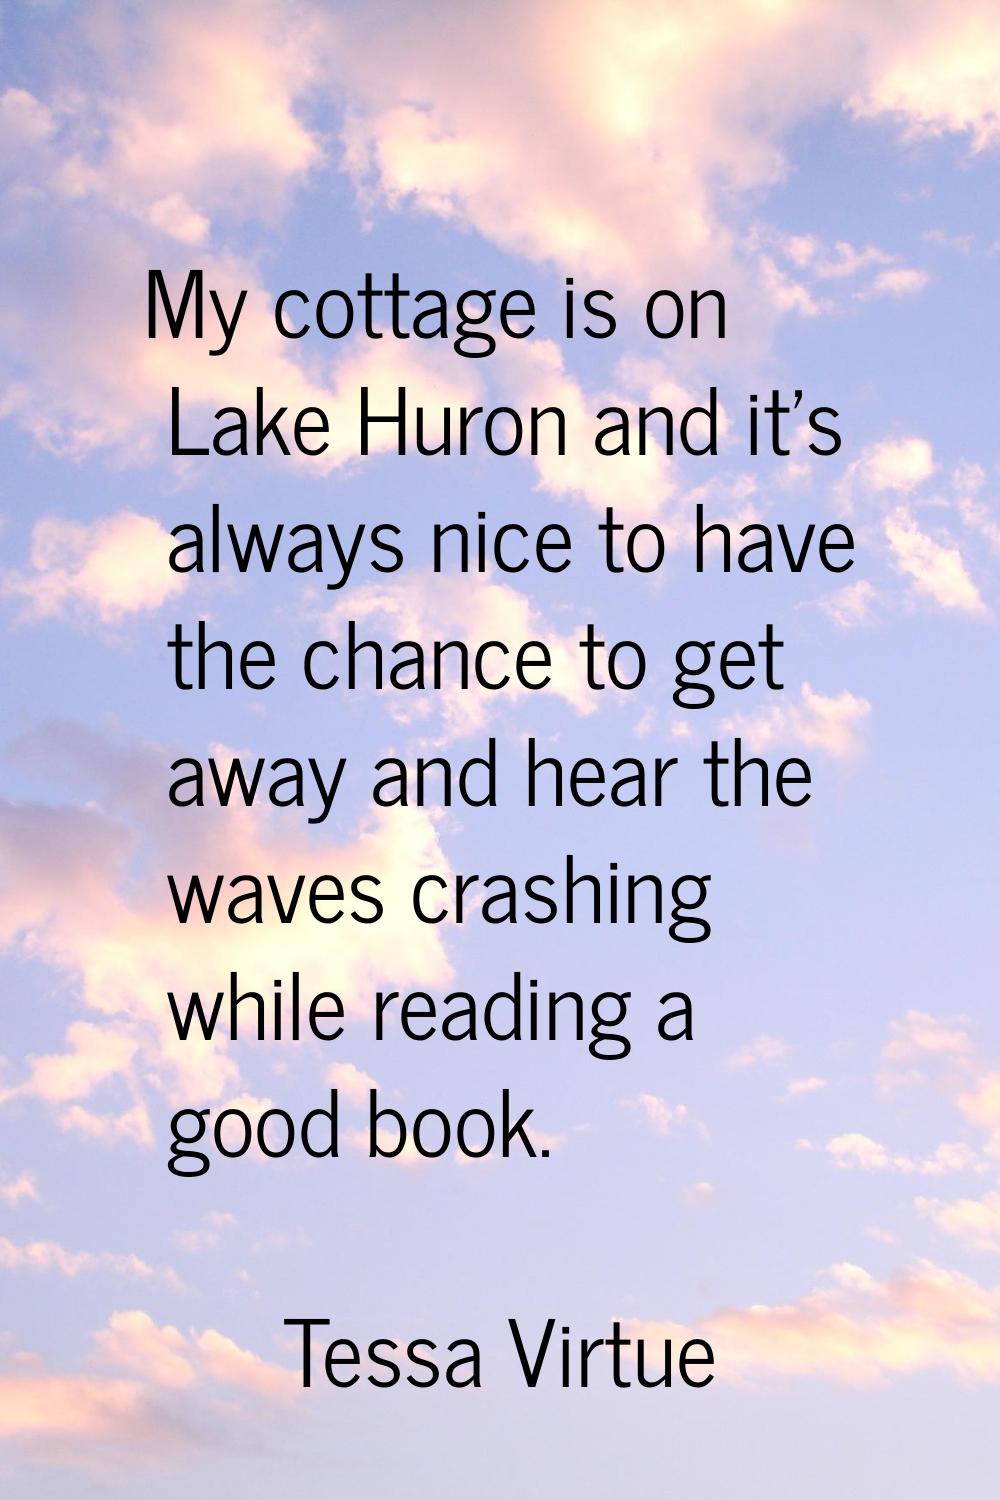 My cottage is on Lake Huron and it's always nice to have the chance to get away and hear the waves 